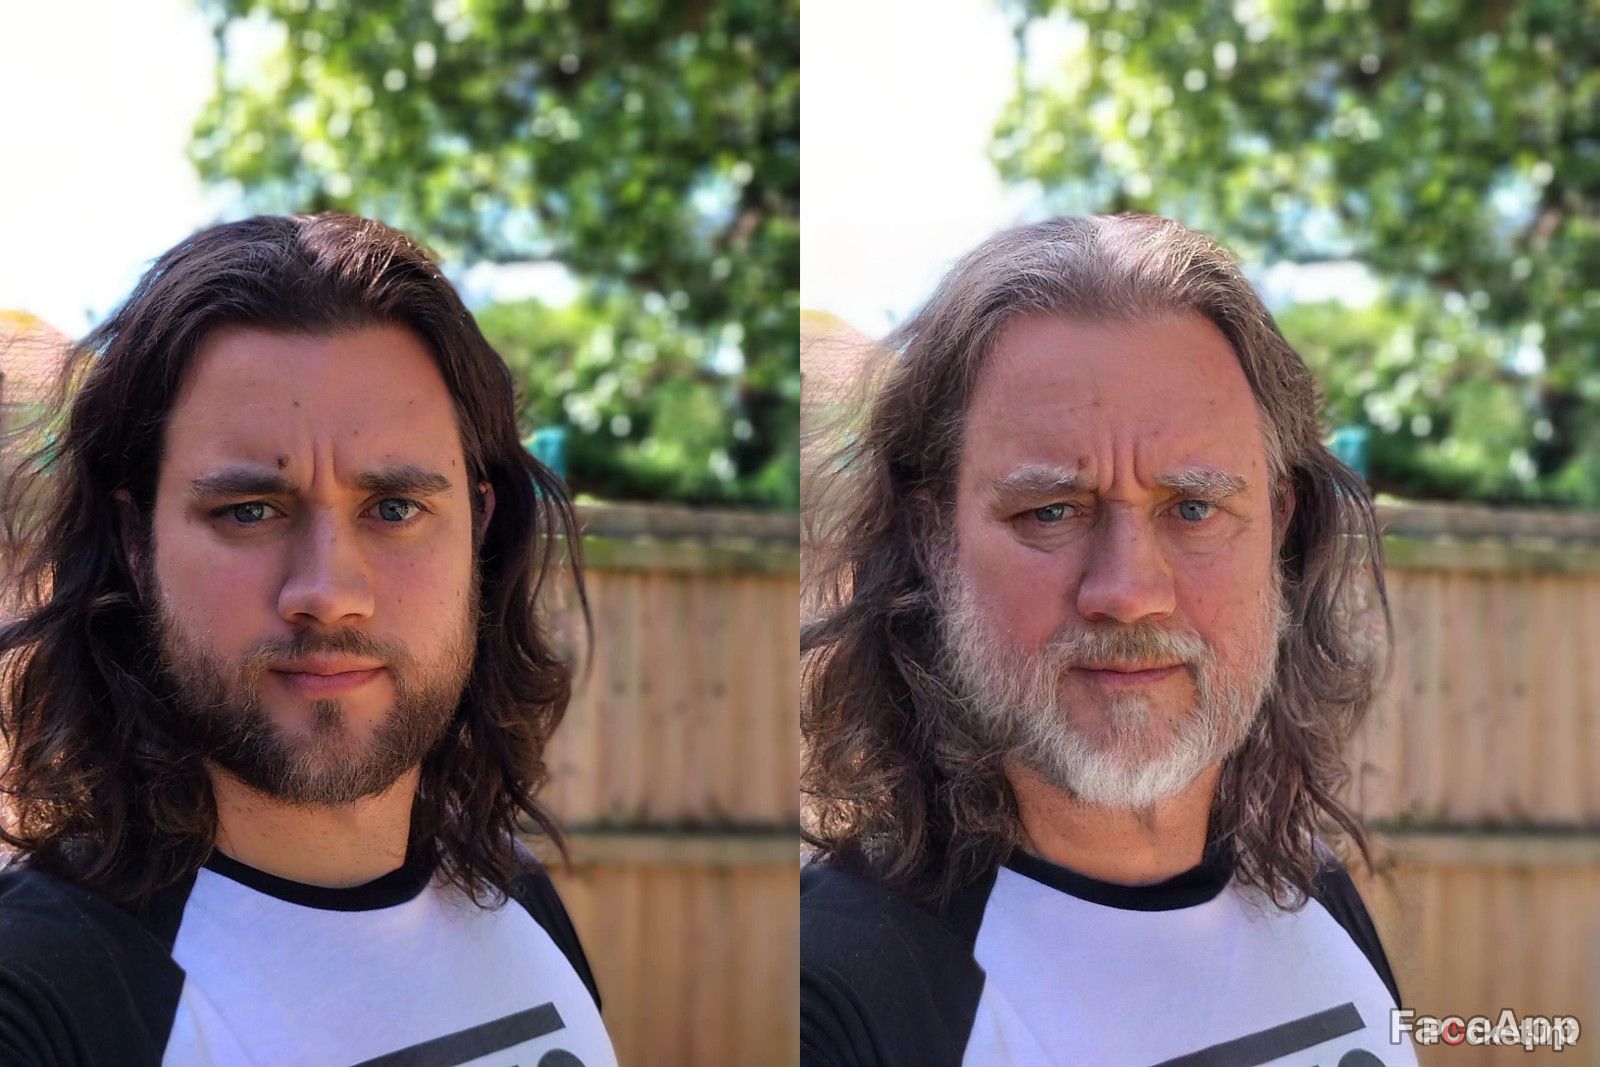 What is FaceApps AI ageing filter and how do you use it image 2